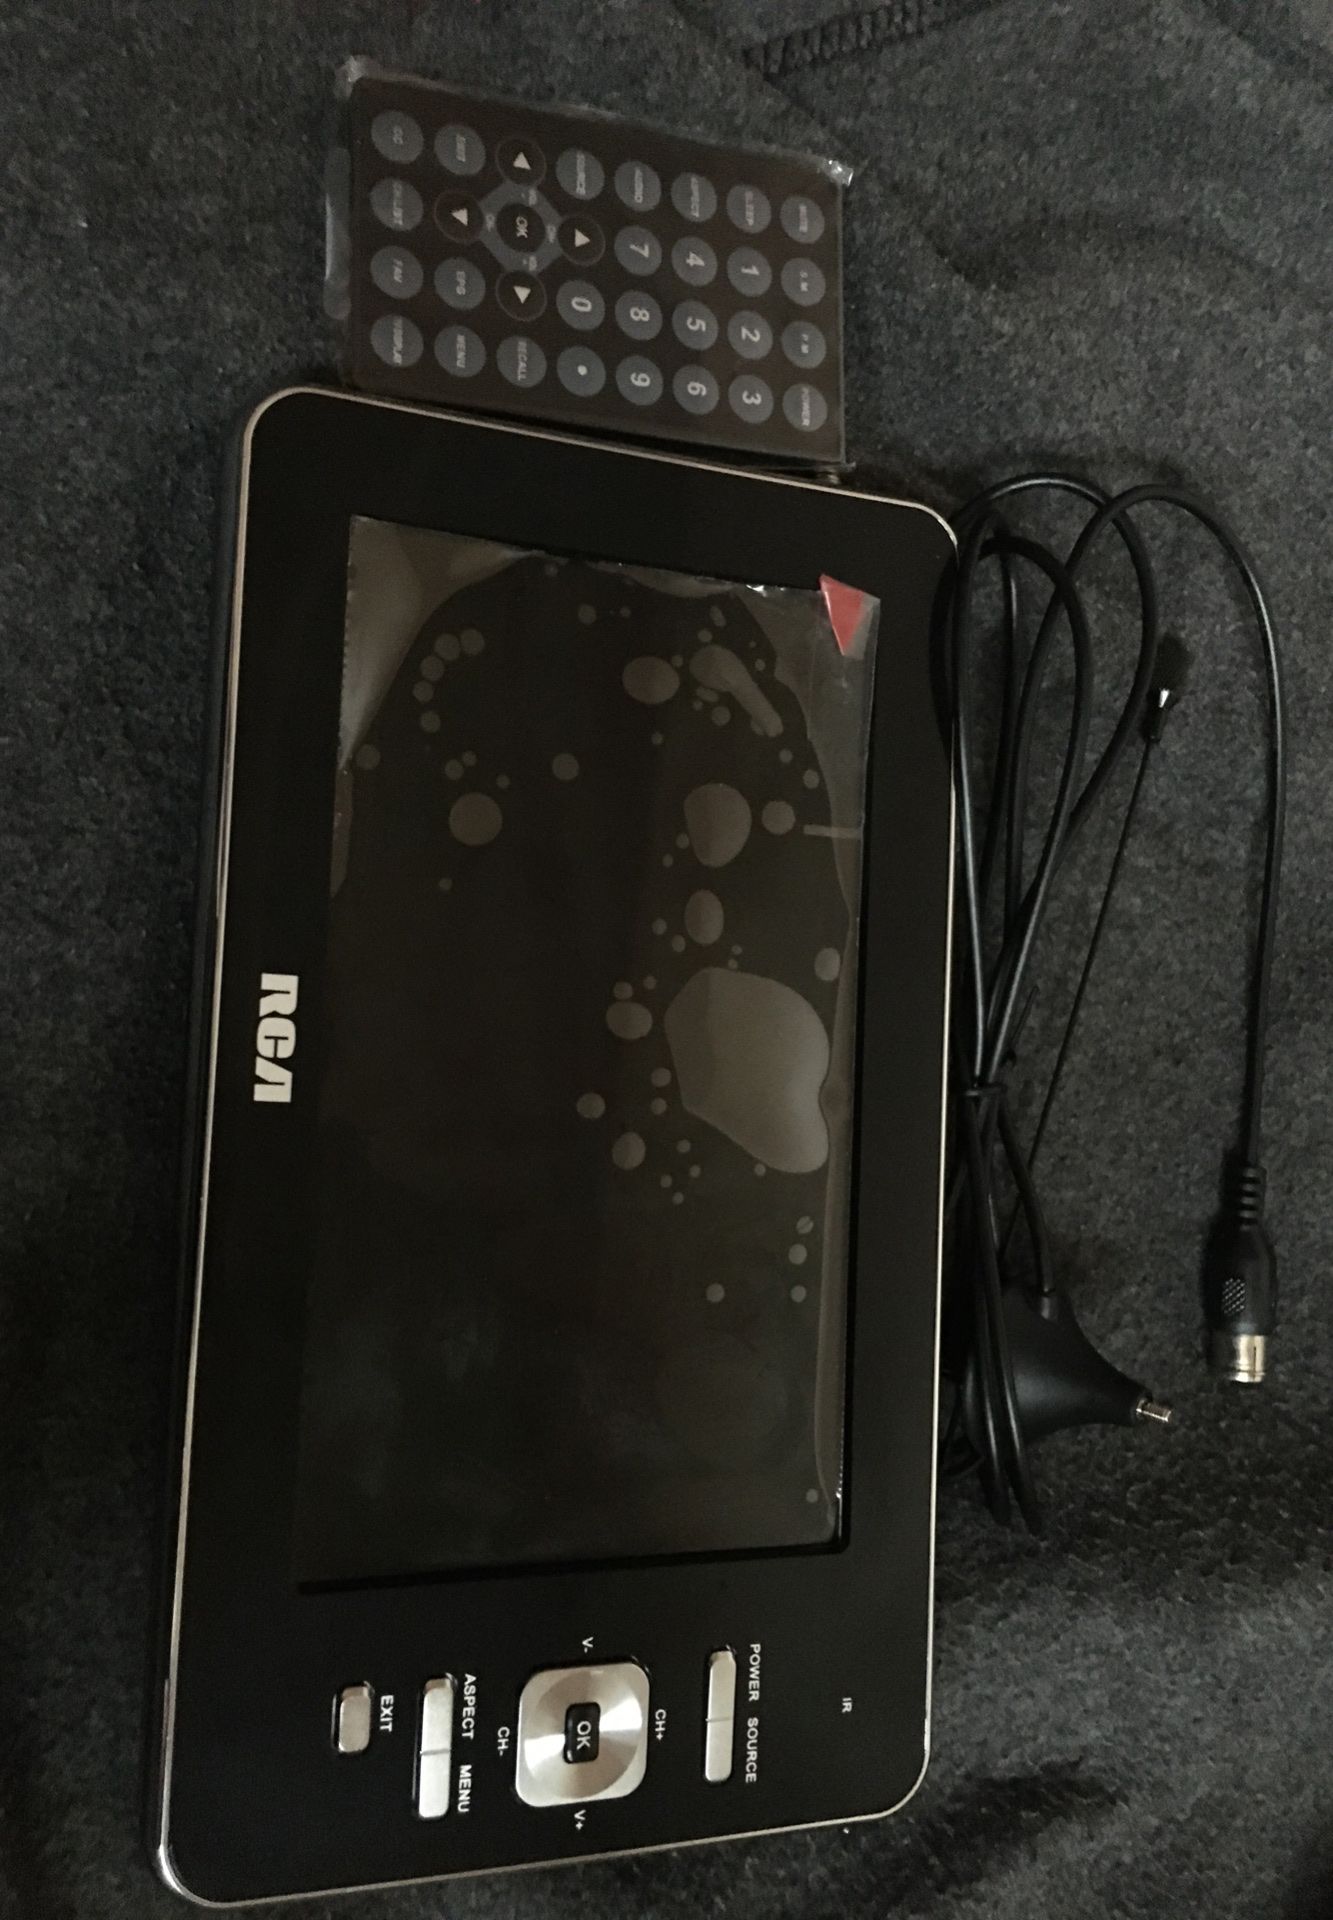 RCA 7 inch portable LCD TV brand new never opened never used brand new /comes with remote and antenna needs DC 12v 1a adaptor has built in 2x Lithiu